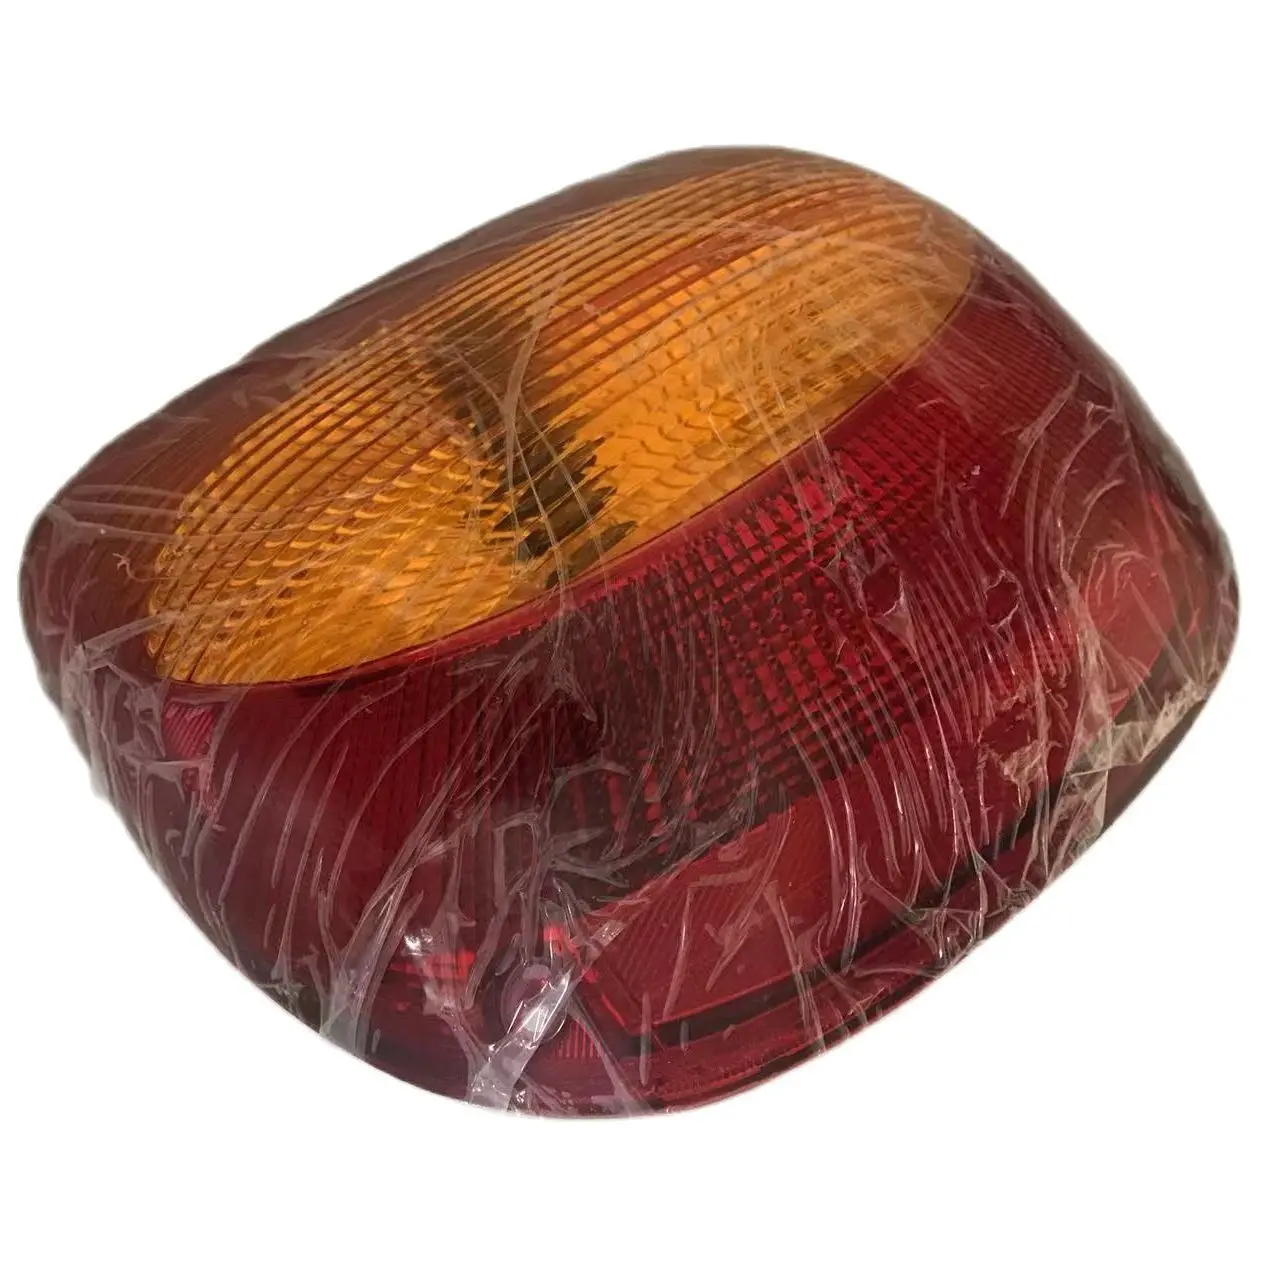 

Replace AL210180 Rear Tail Light With Brake Light For John Deere 1654 1854 2054 2104 5 Series Tractor Lamp